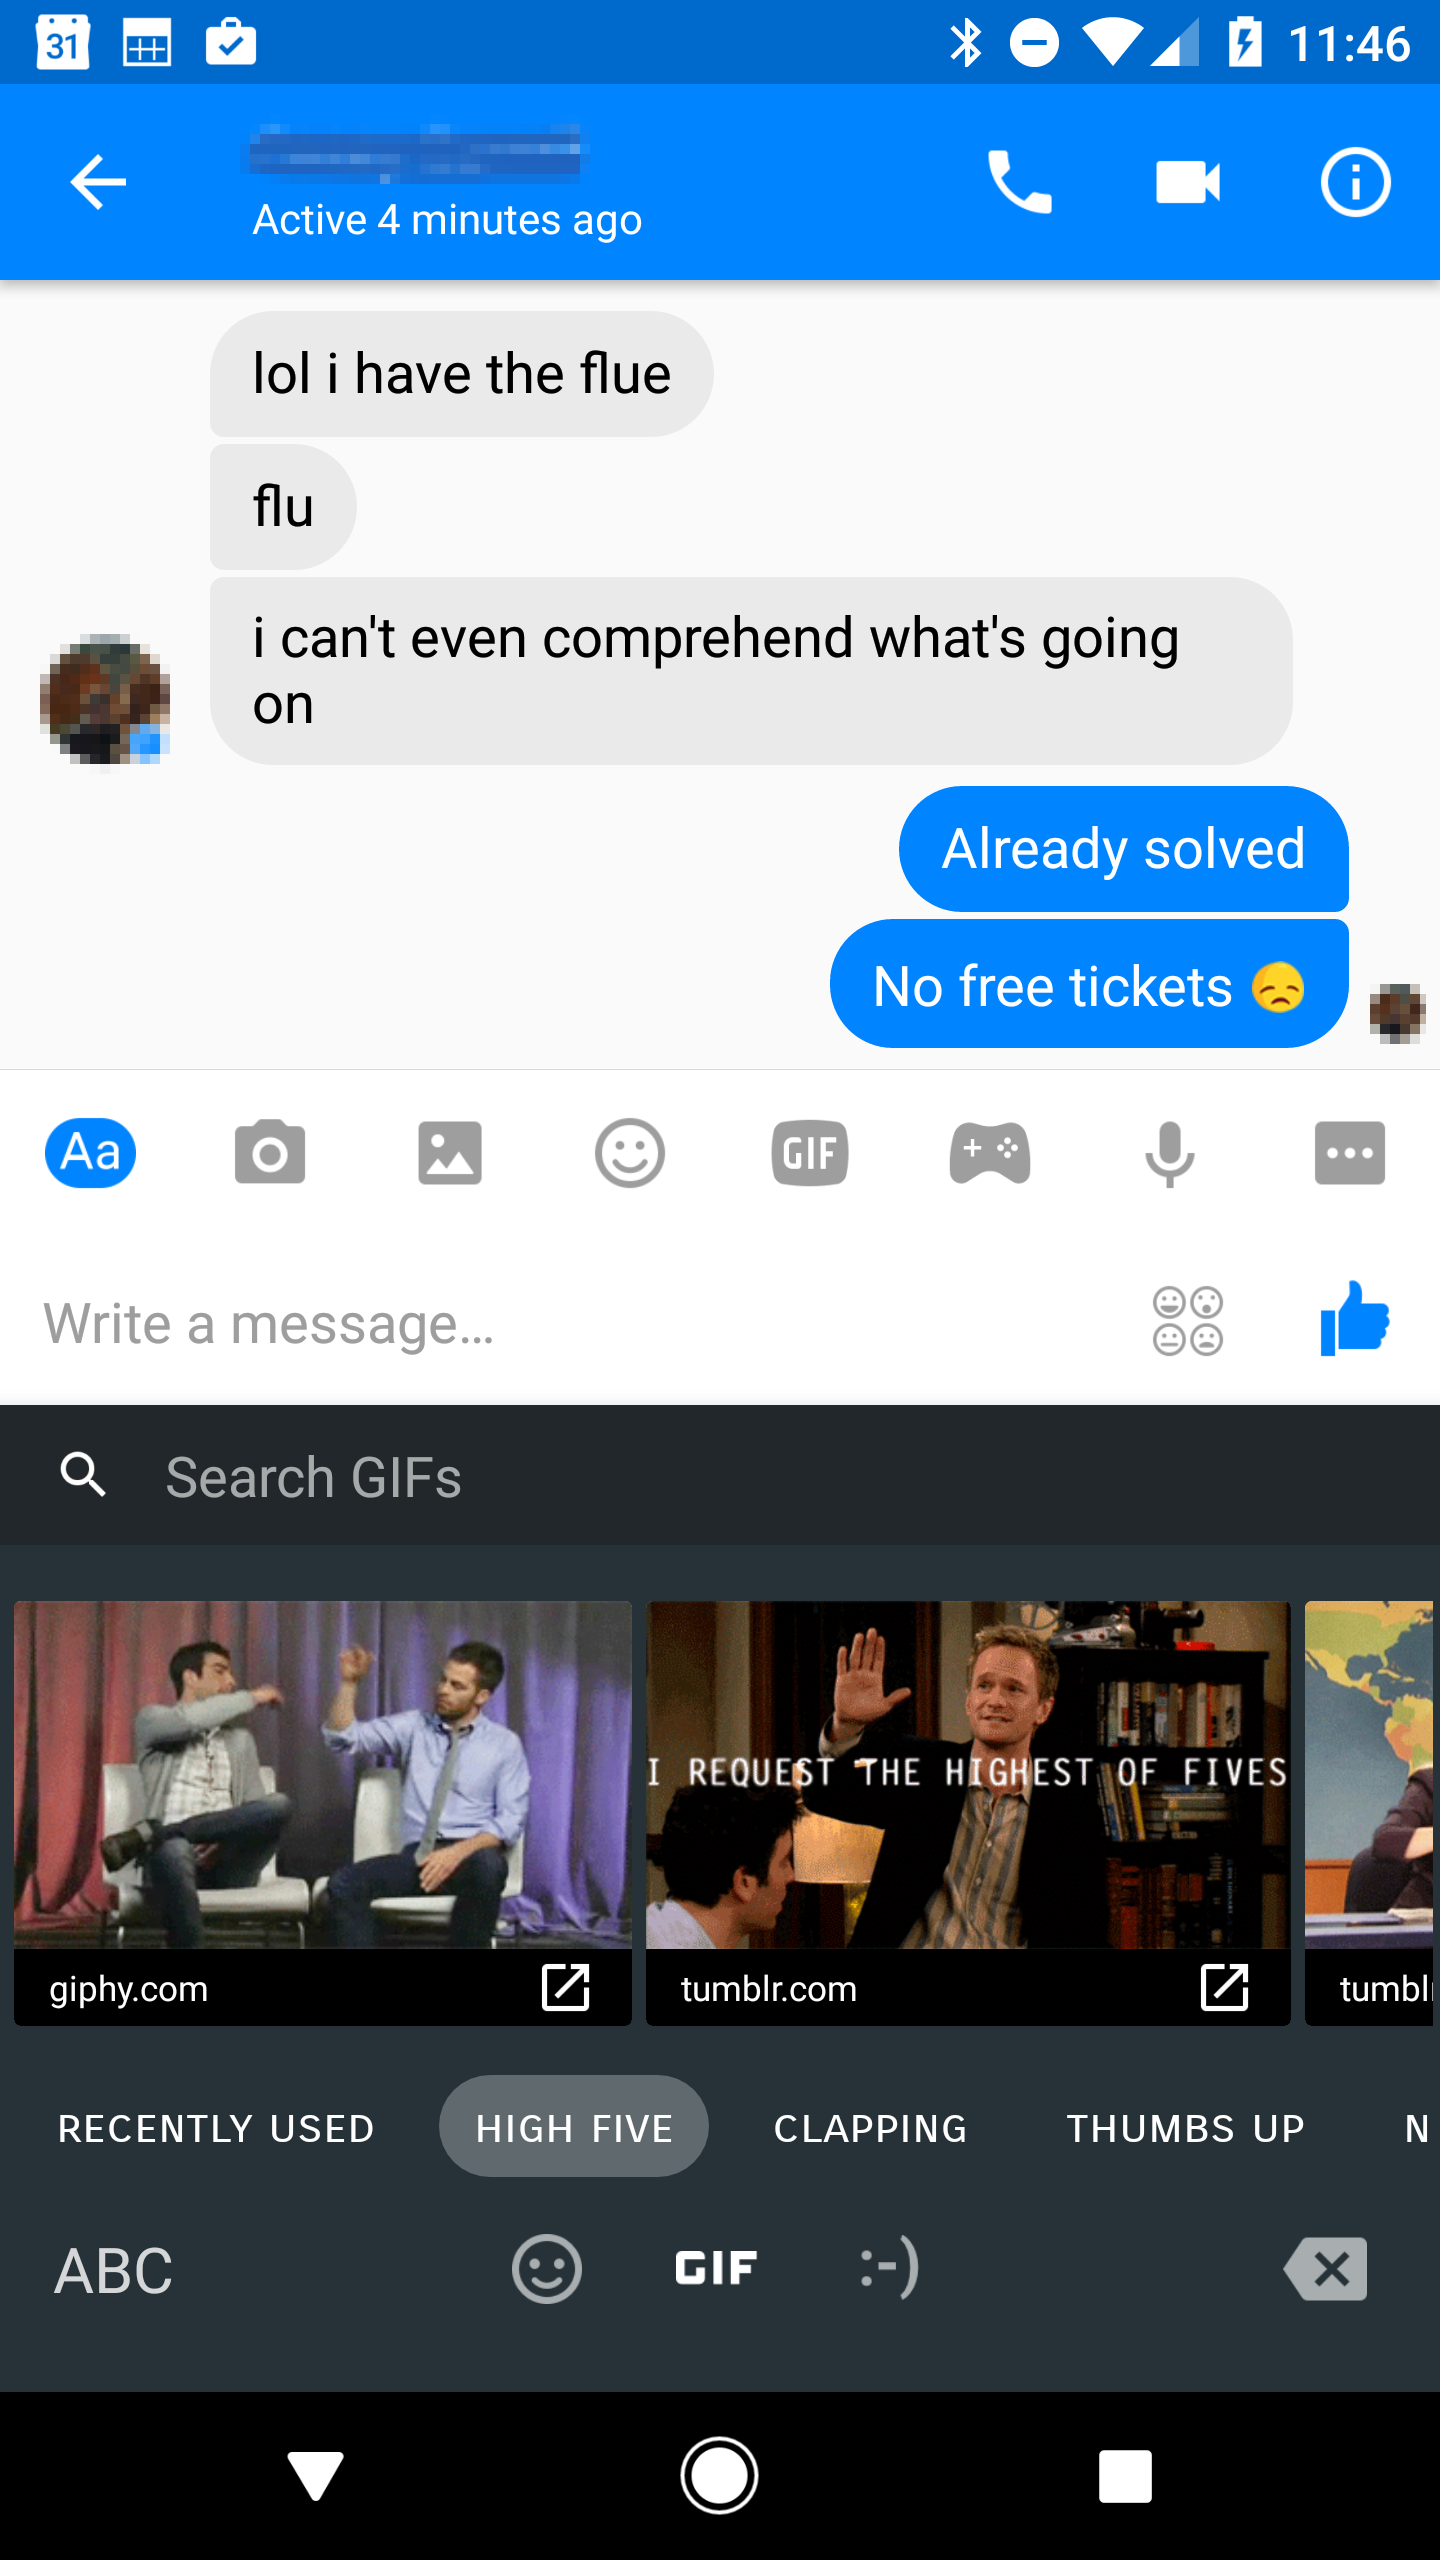  Send GIF images via the Messenger APK- 23 tips and tricks for Facebook Messenger that you may not know